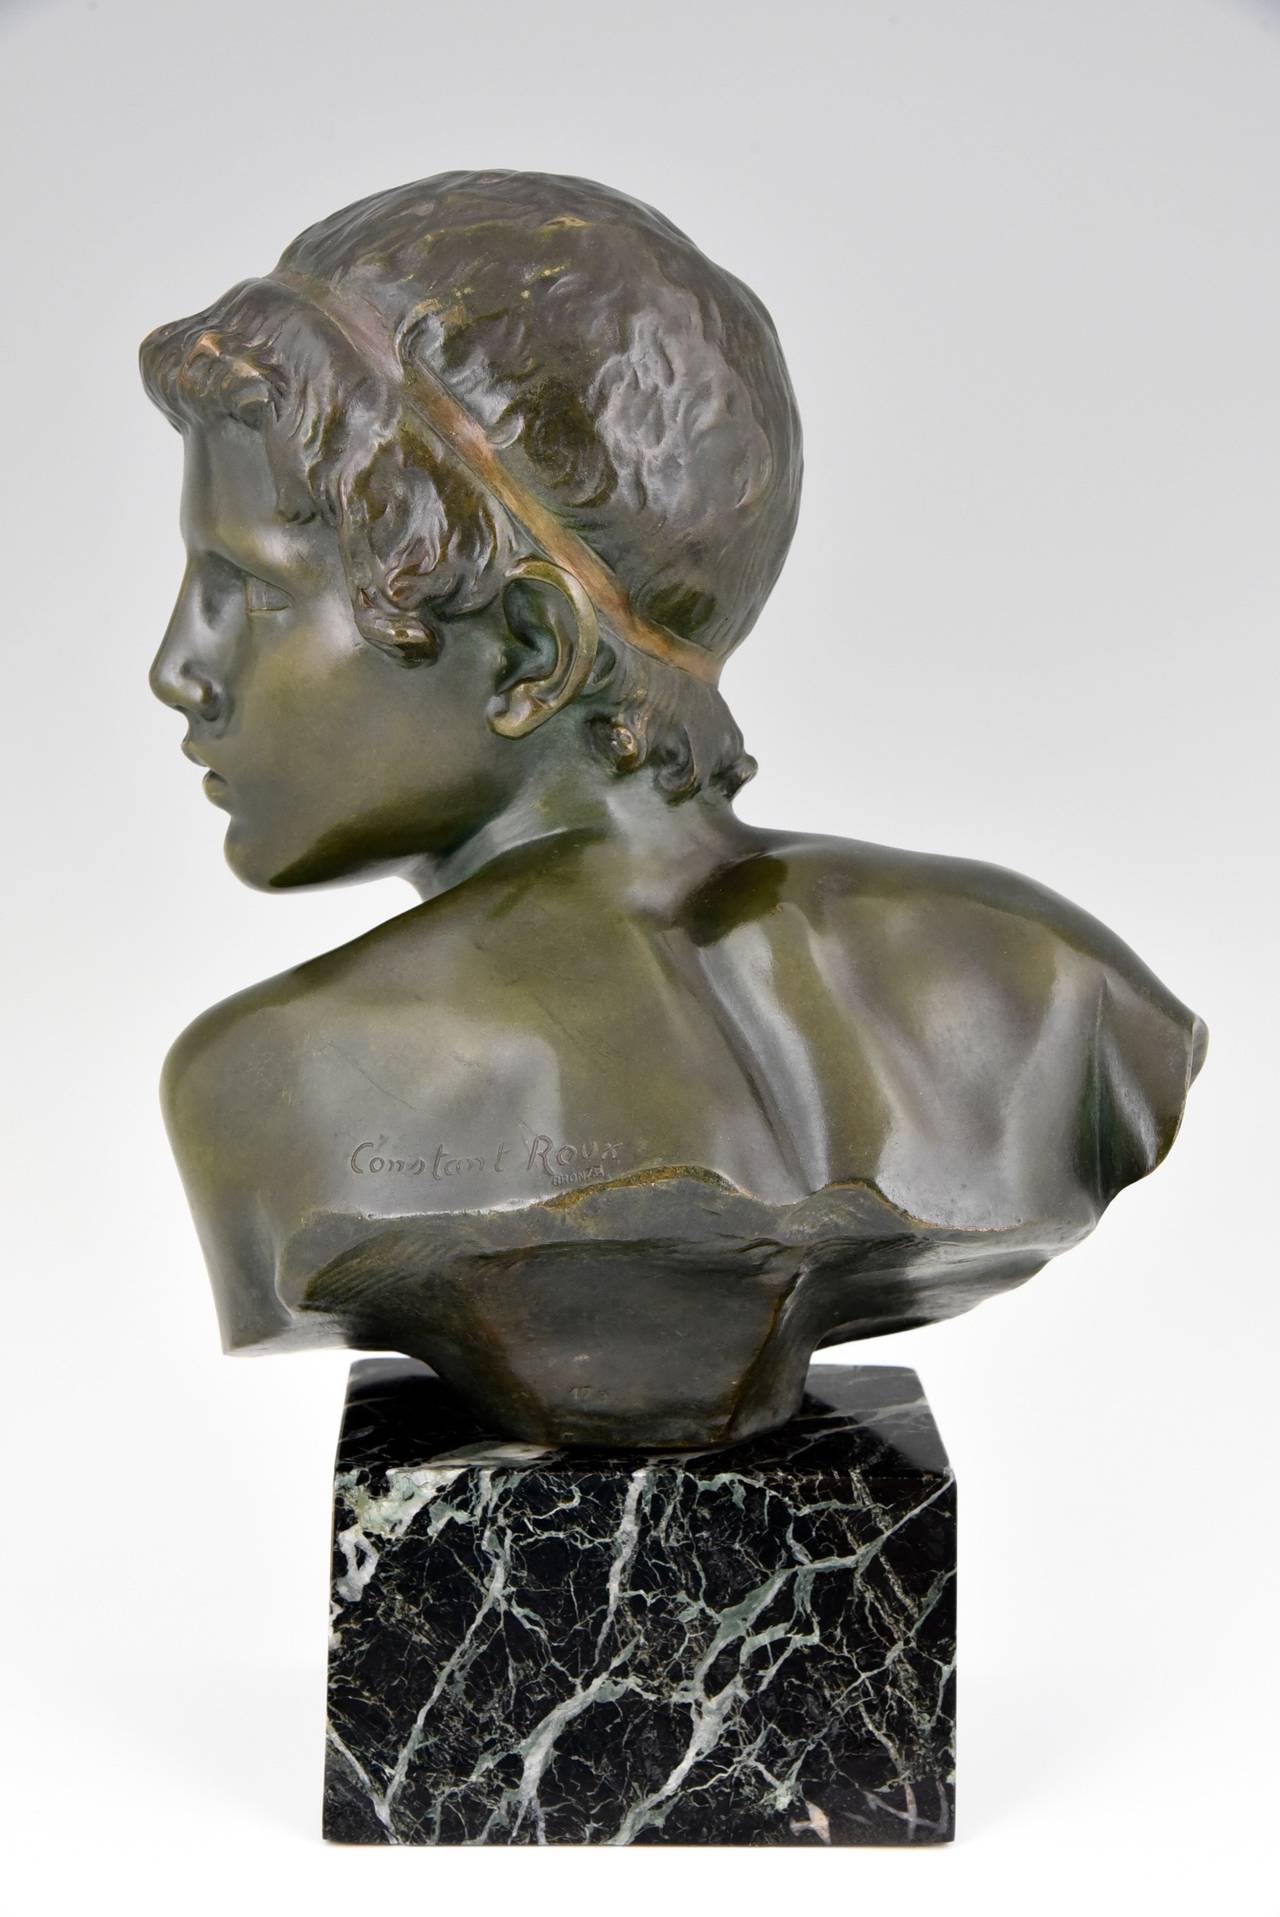 French Art Deco bronze sculpture of a boy, Young Achilles by Constant Roux, 1920.